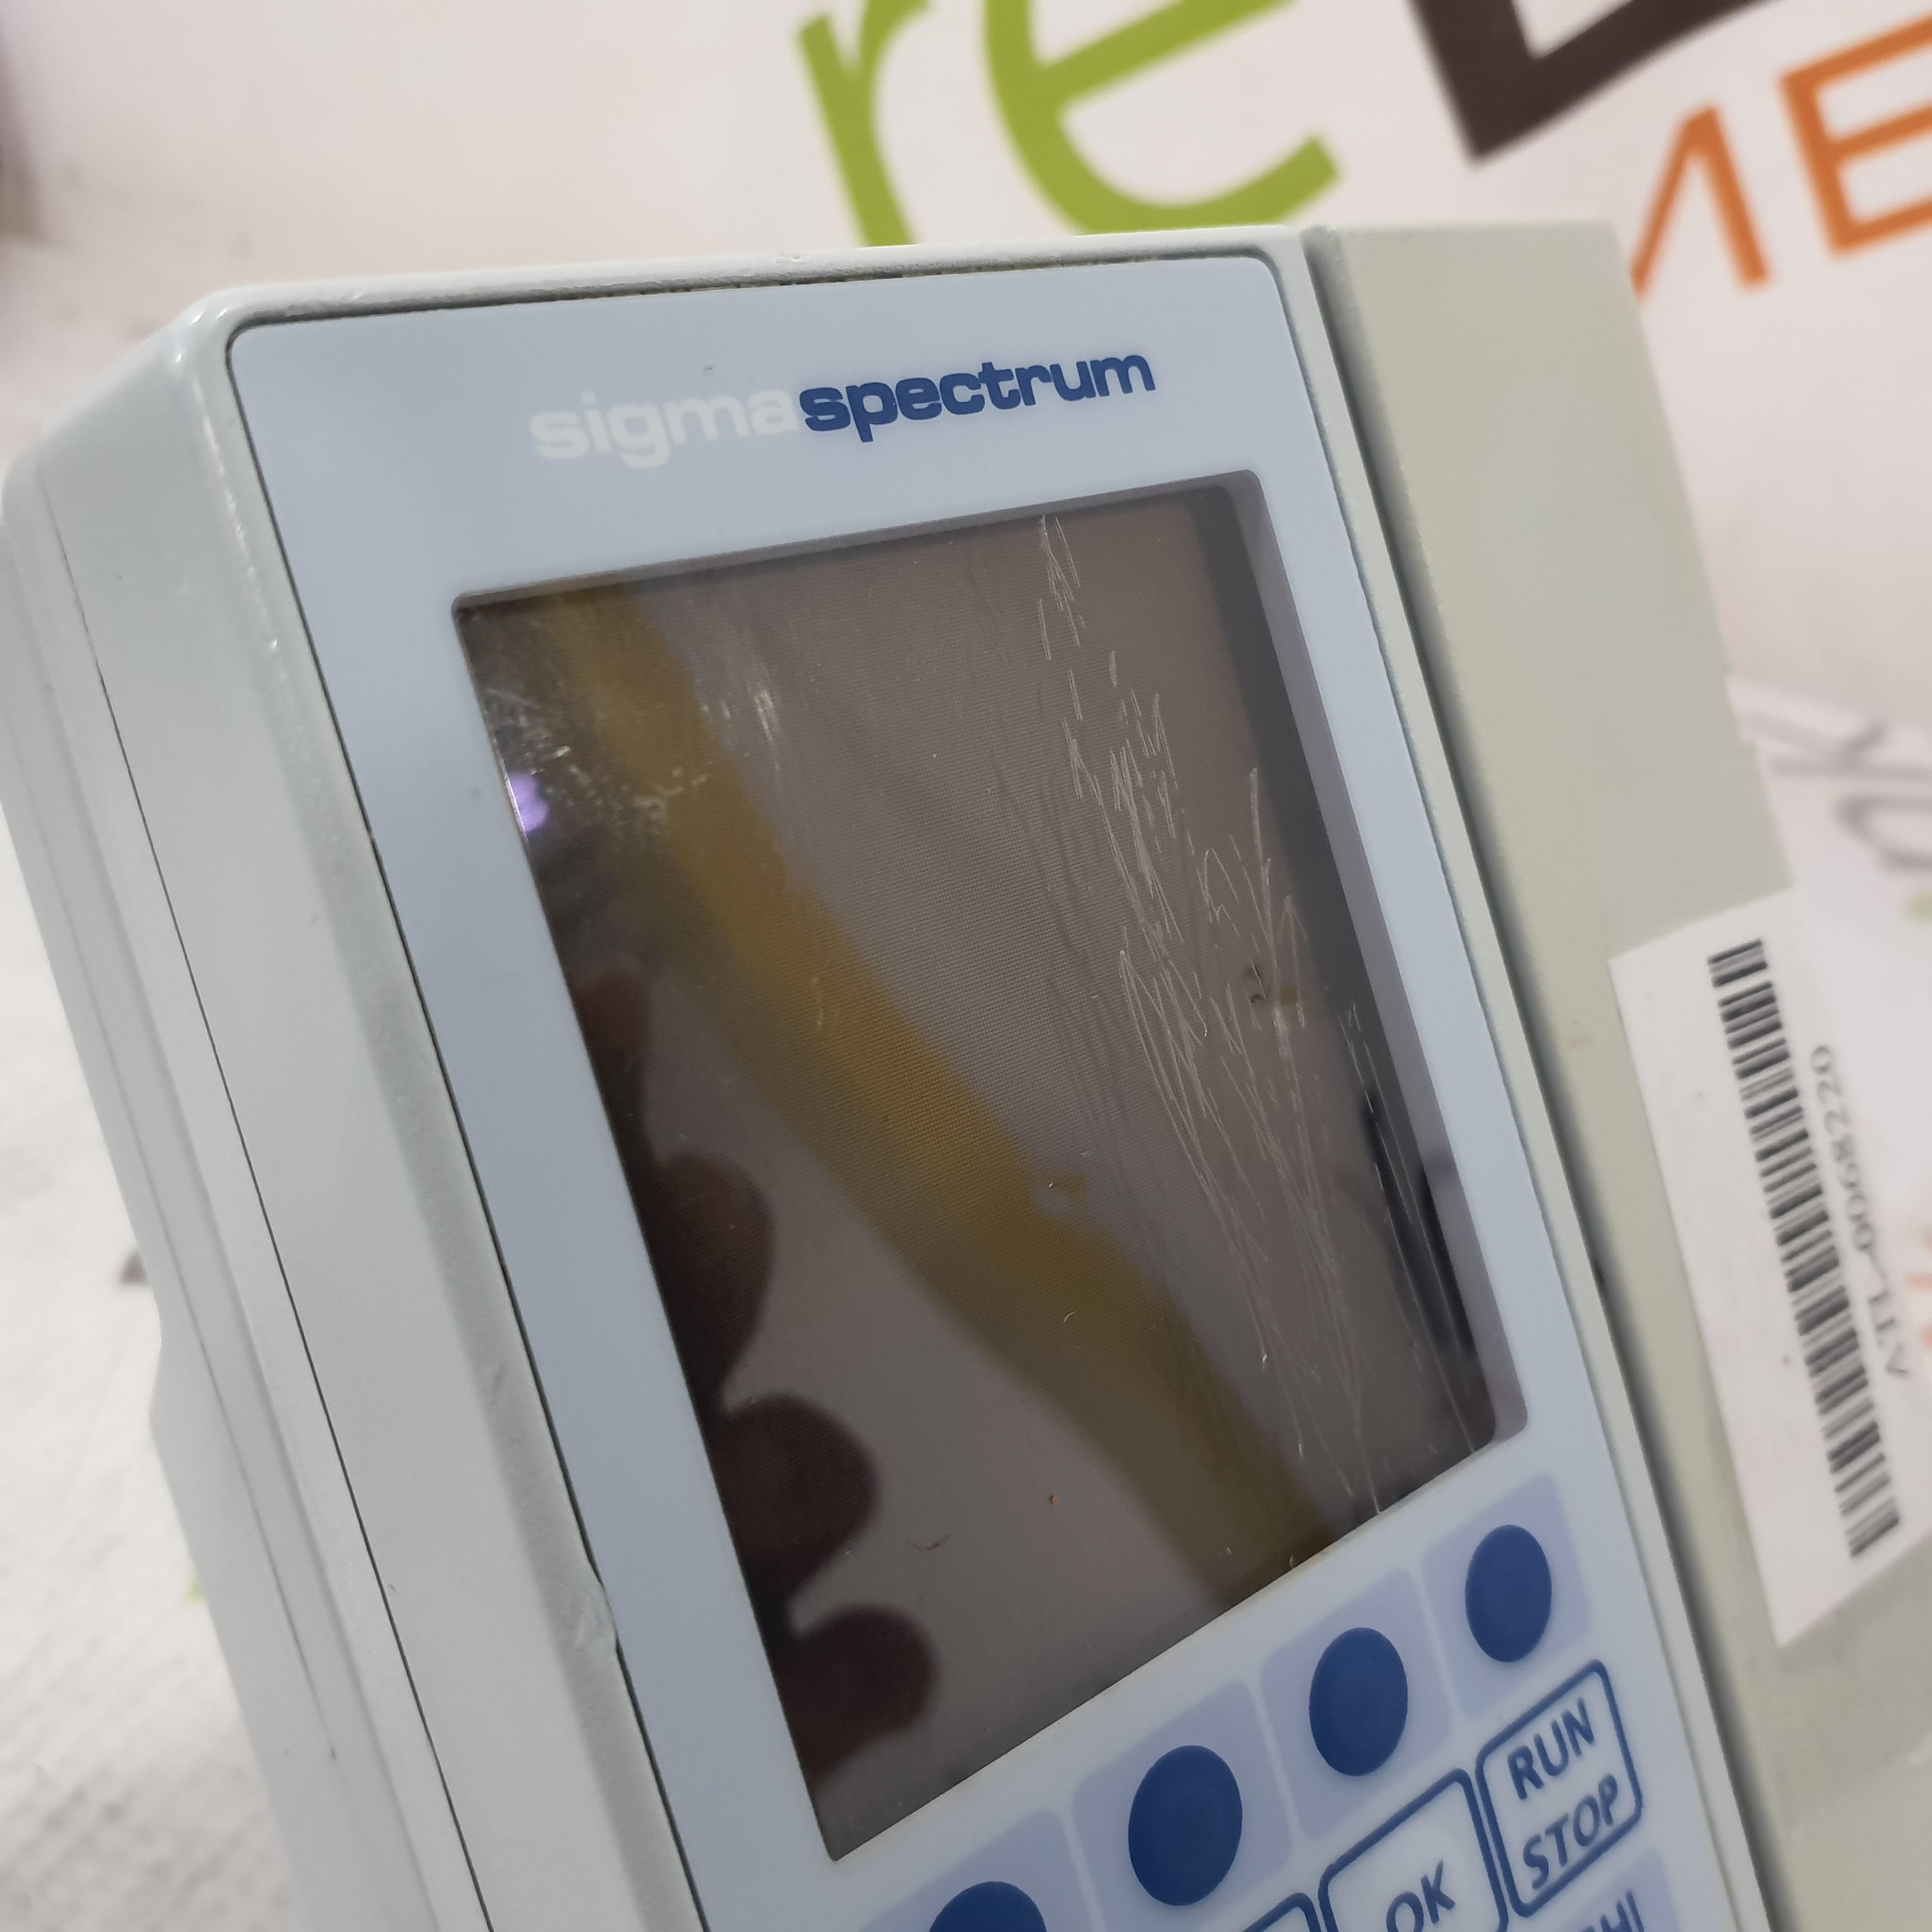 Baxter Sigma Spectrum 6.05.13 without Battery Infusion Pump - 379467